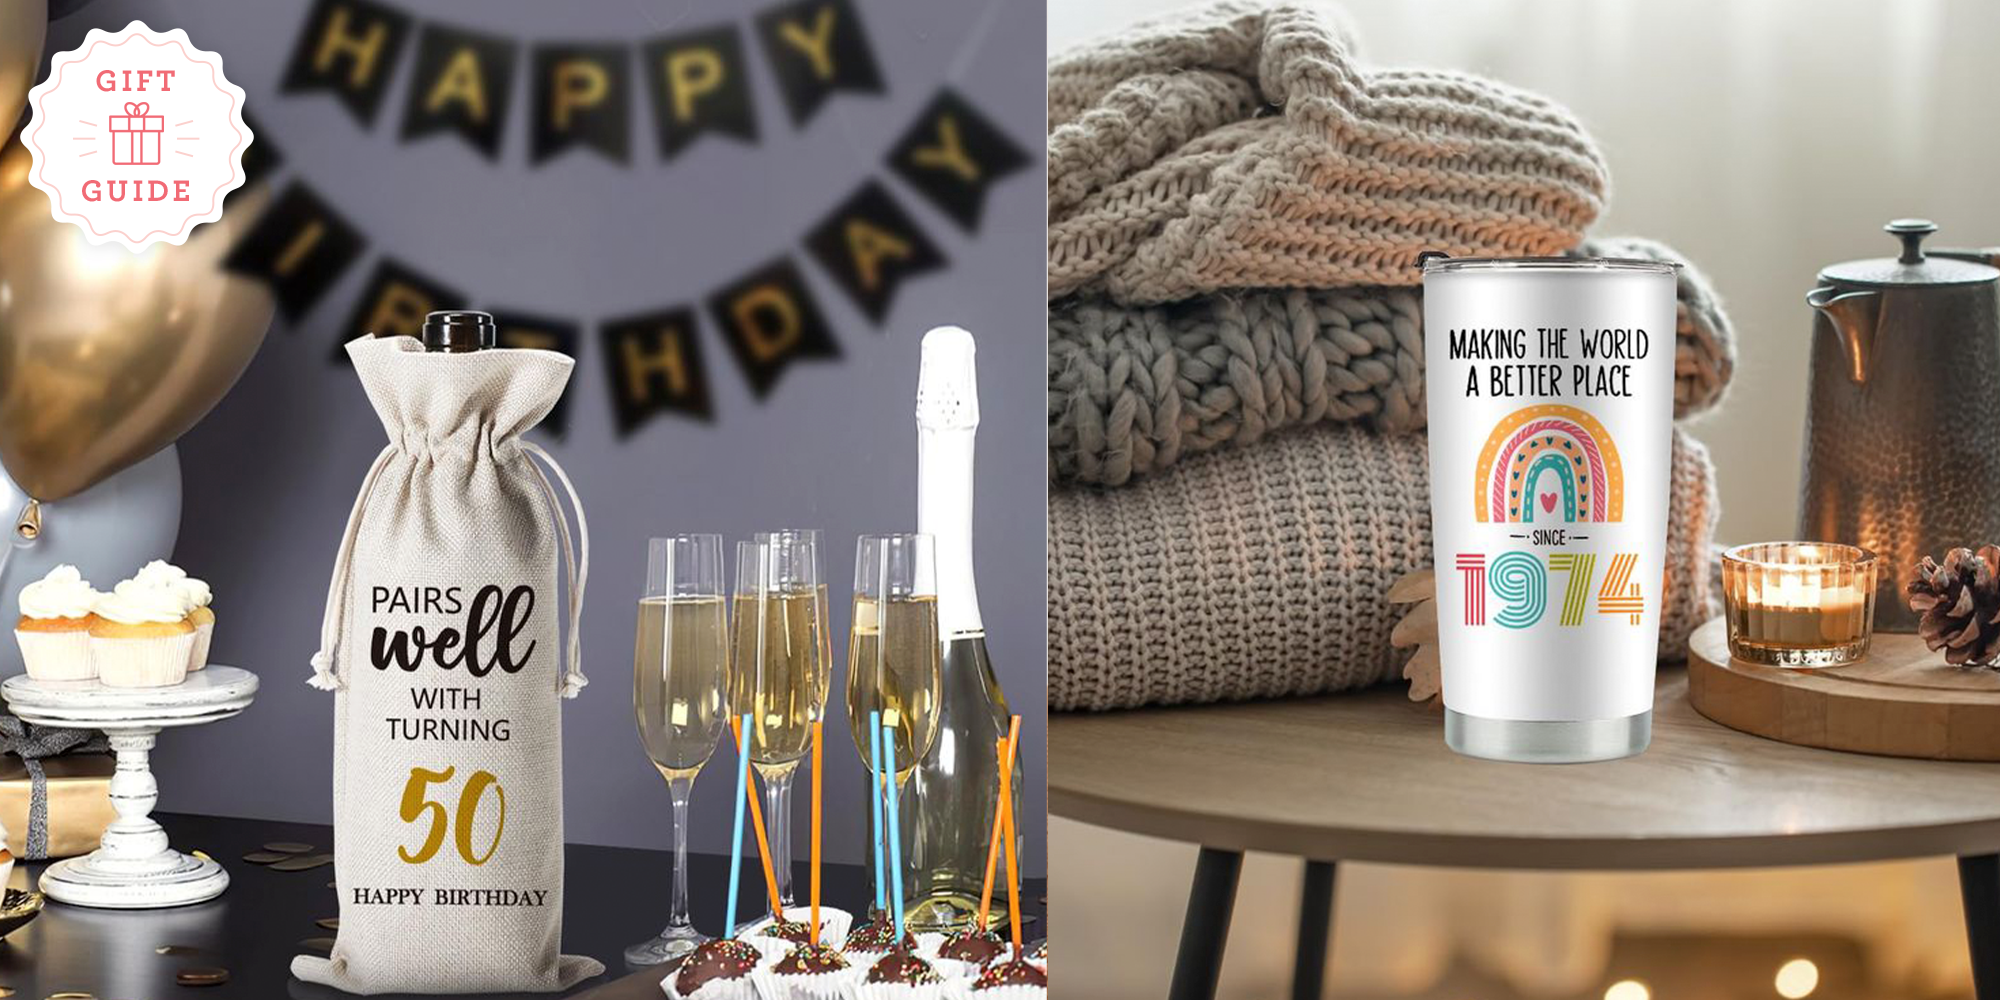 Best Gift For Mother On Her Birthday | Unique Gifts Ideas